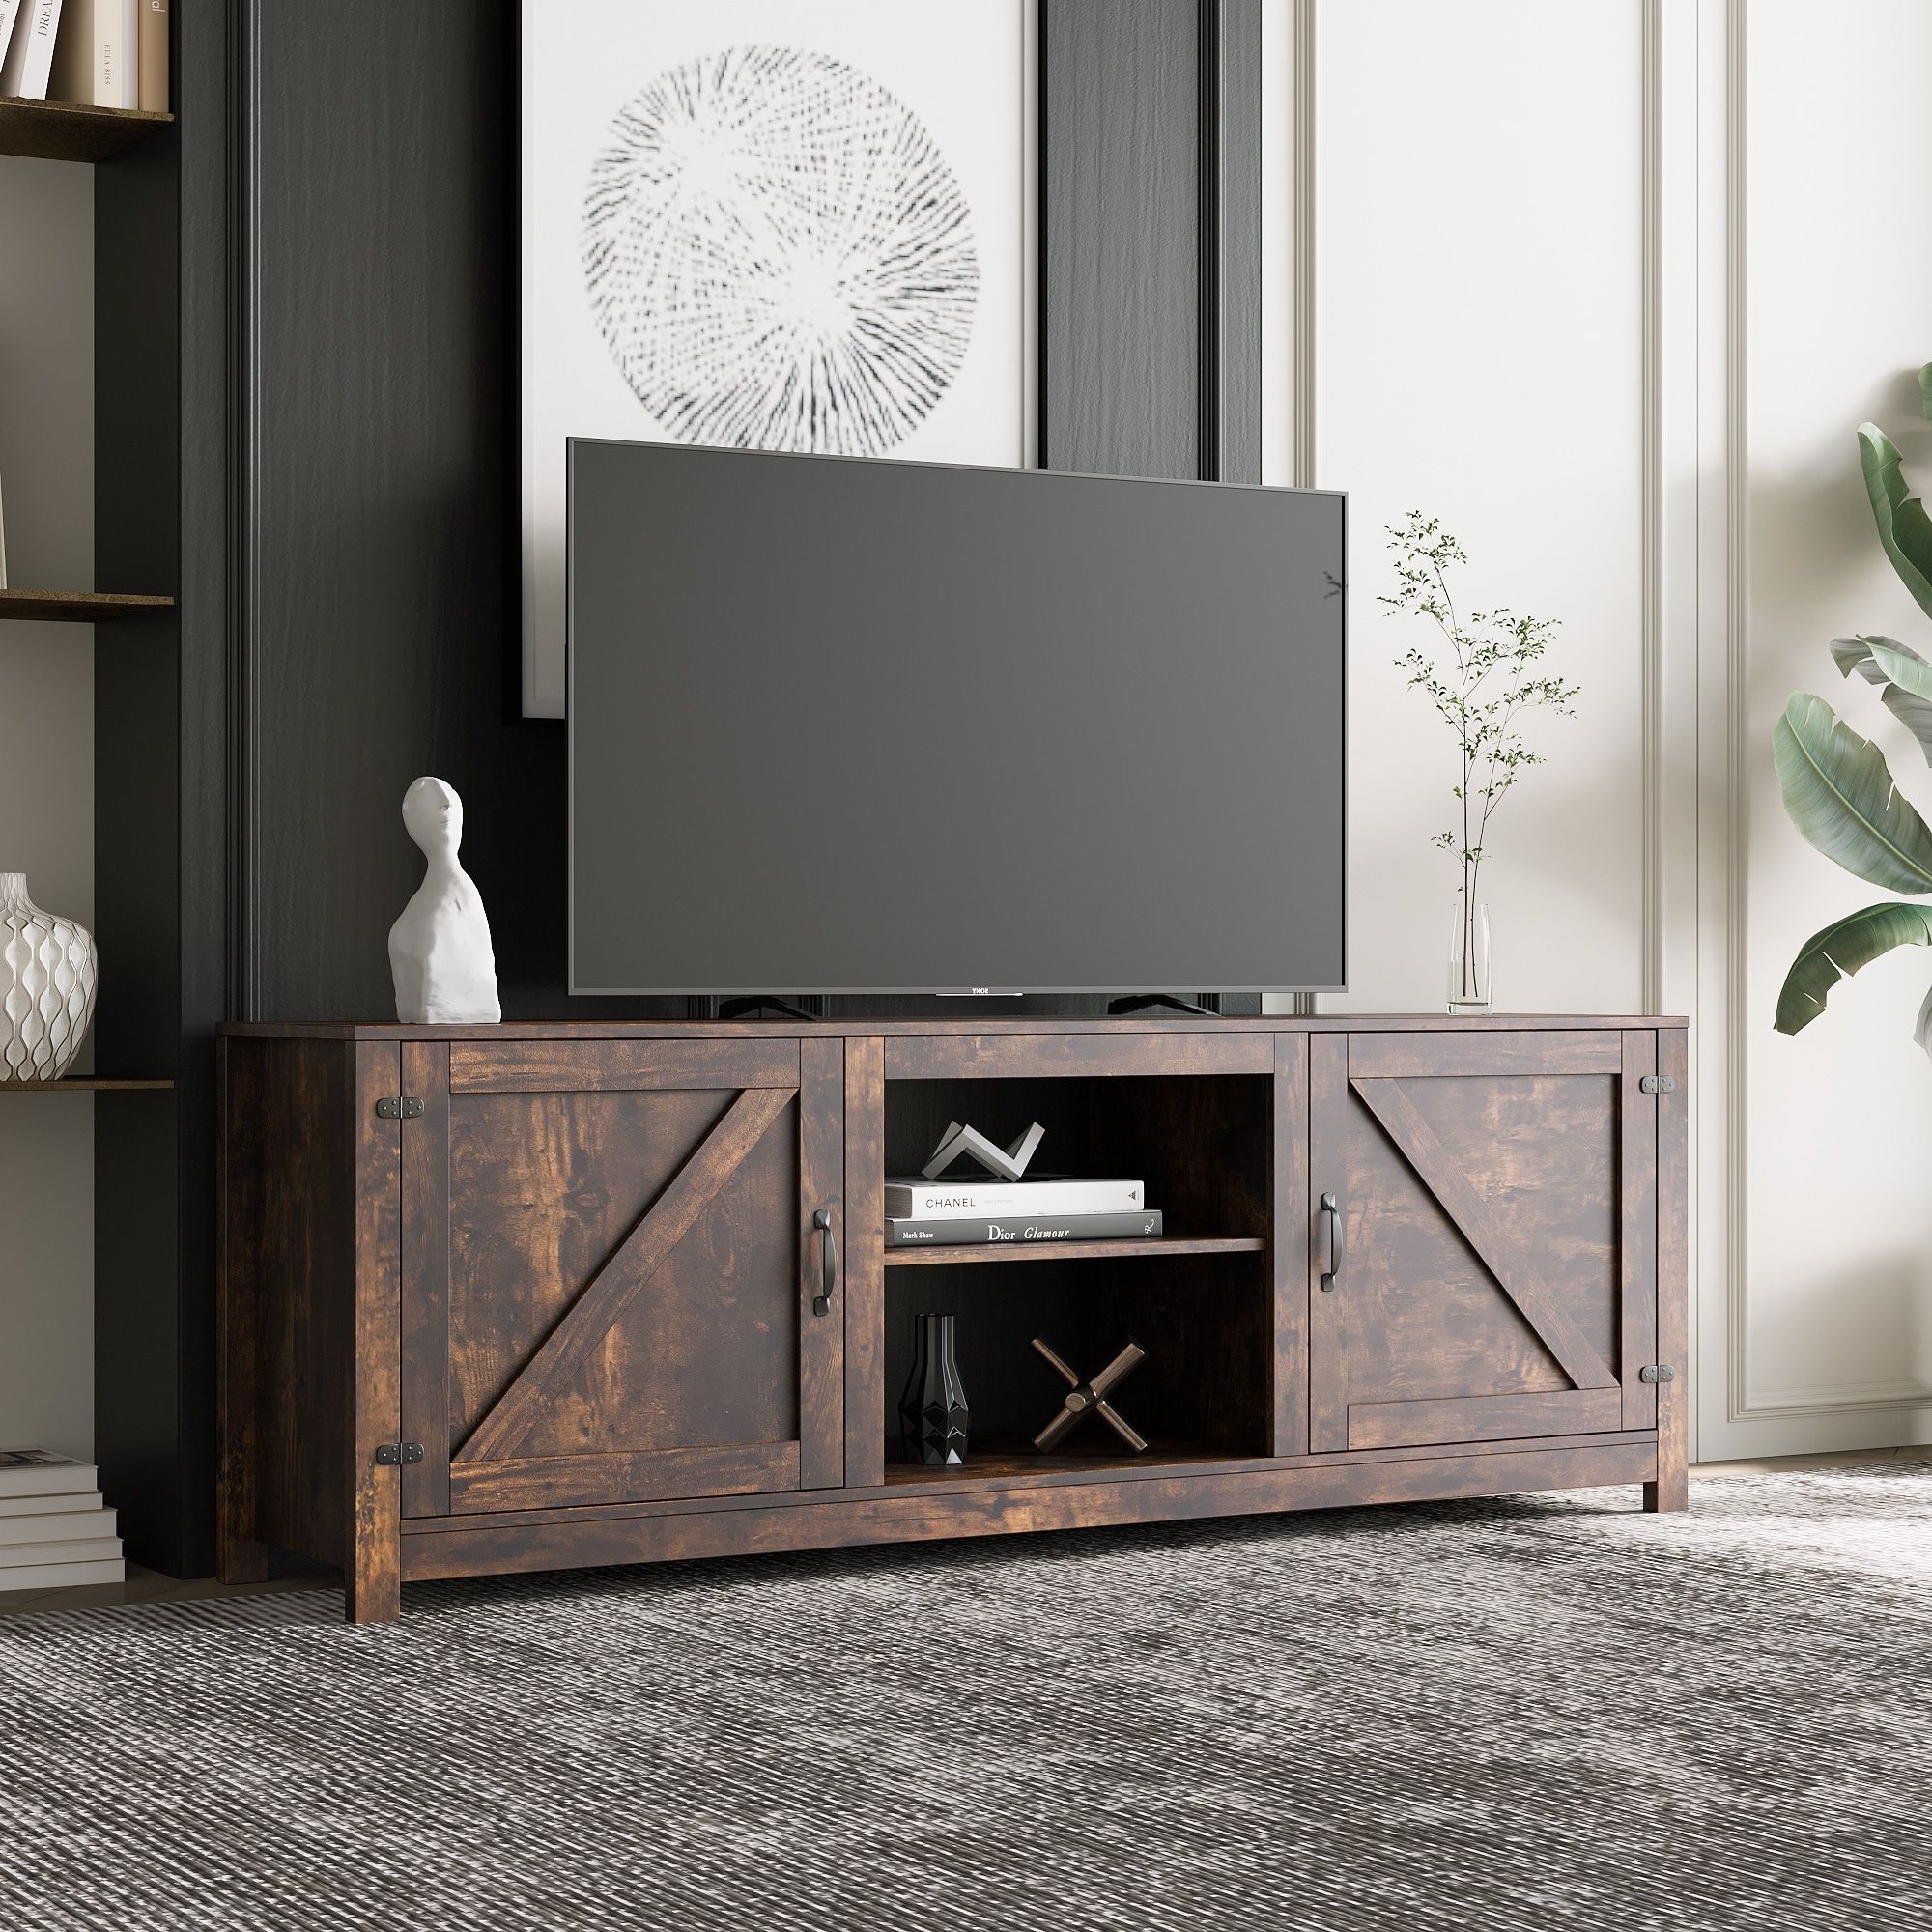 Farmhouse Style Tv Stand, Wood Entertainment Center Media Console With 2  Shelves 2 Drawers – Bed Bath & Beyond – 37853671 Within Farmhouse Media Entertainment Centers (View 8 of 20)